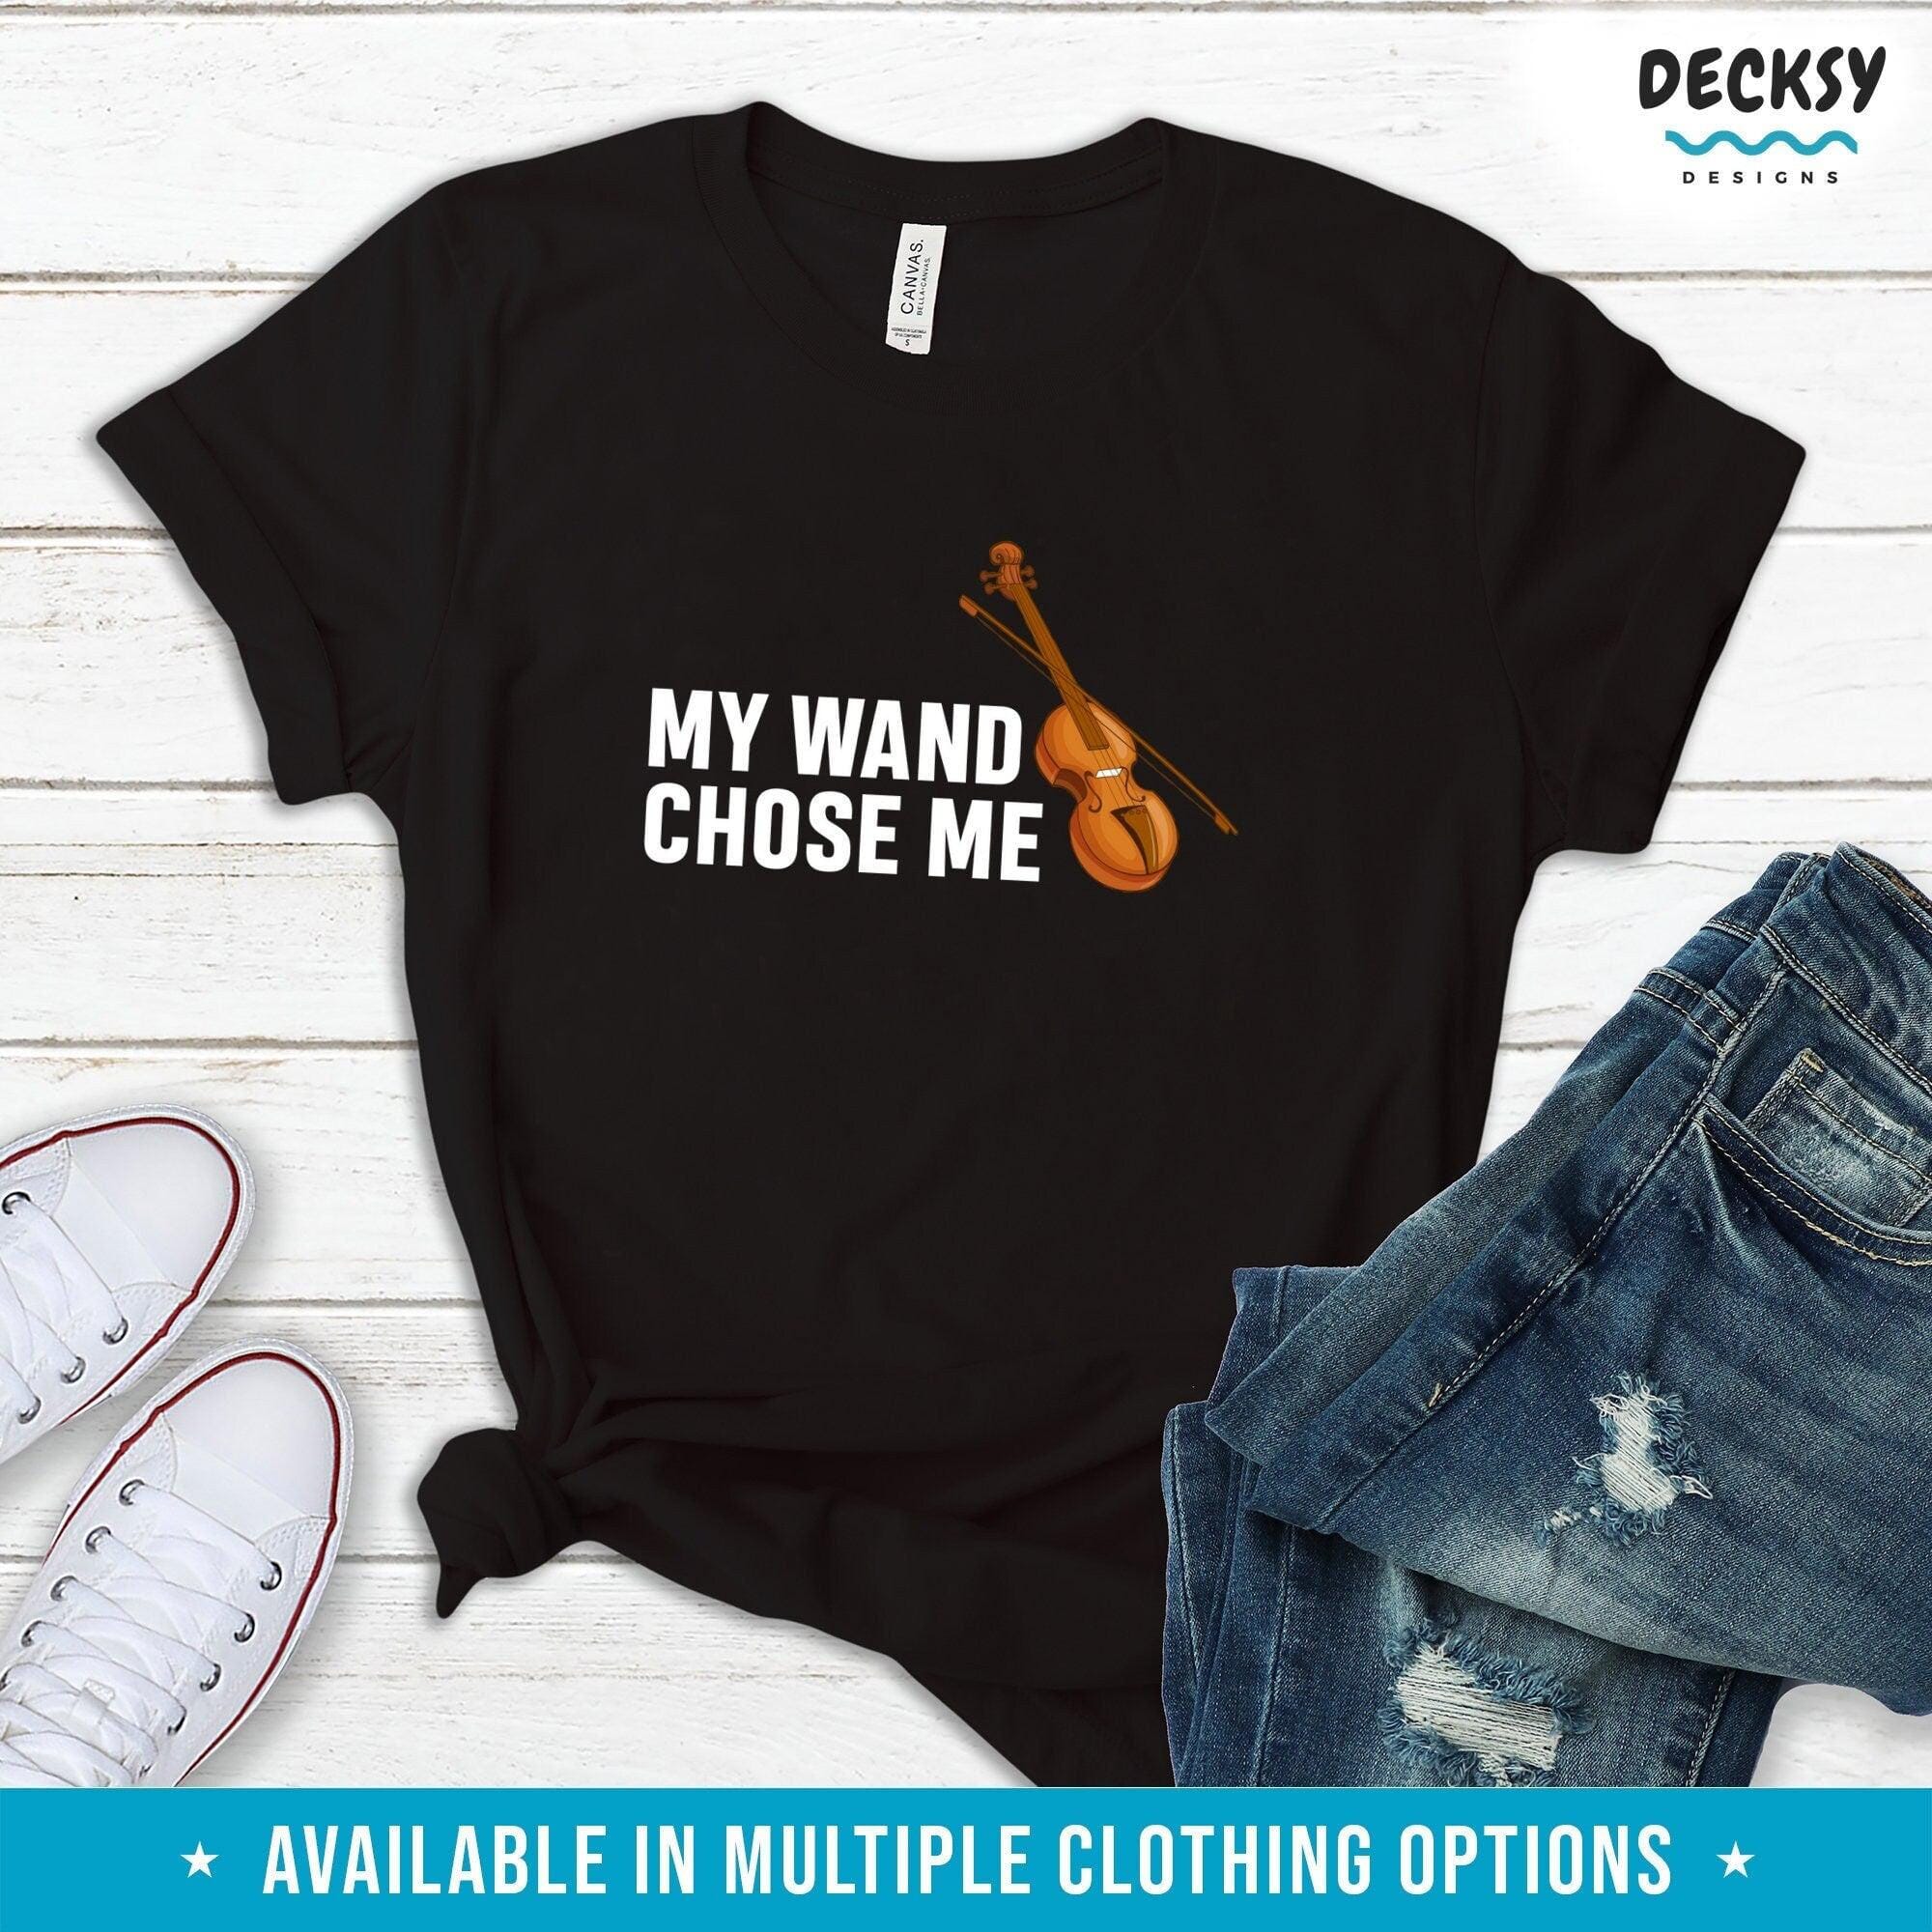 Violin Player Tshirt, Violinist Gift-Clothing:Gender-Neutral Adult Clothing:Tops & Tees:T-shirts:Graphic Tees-DecksyDesigns